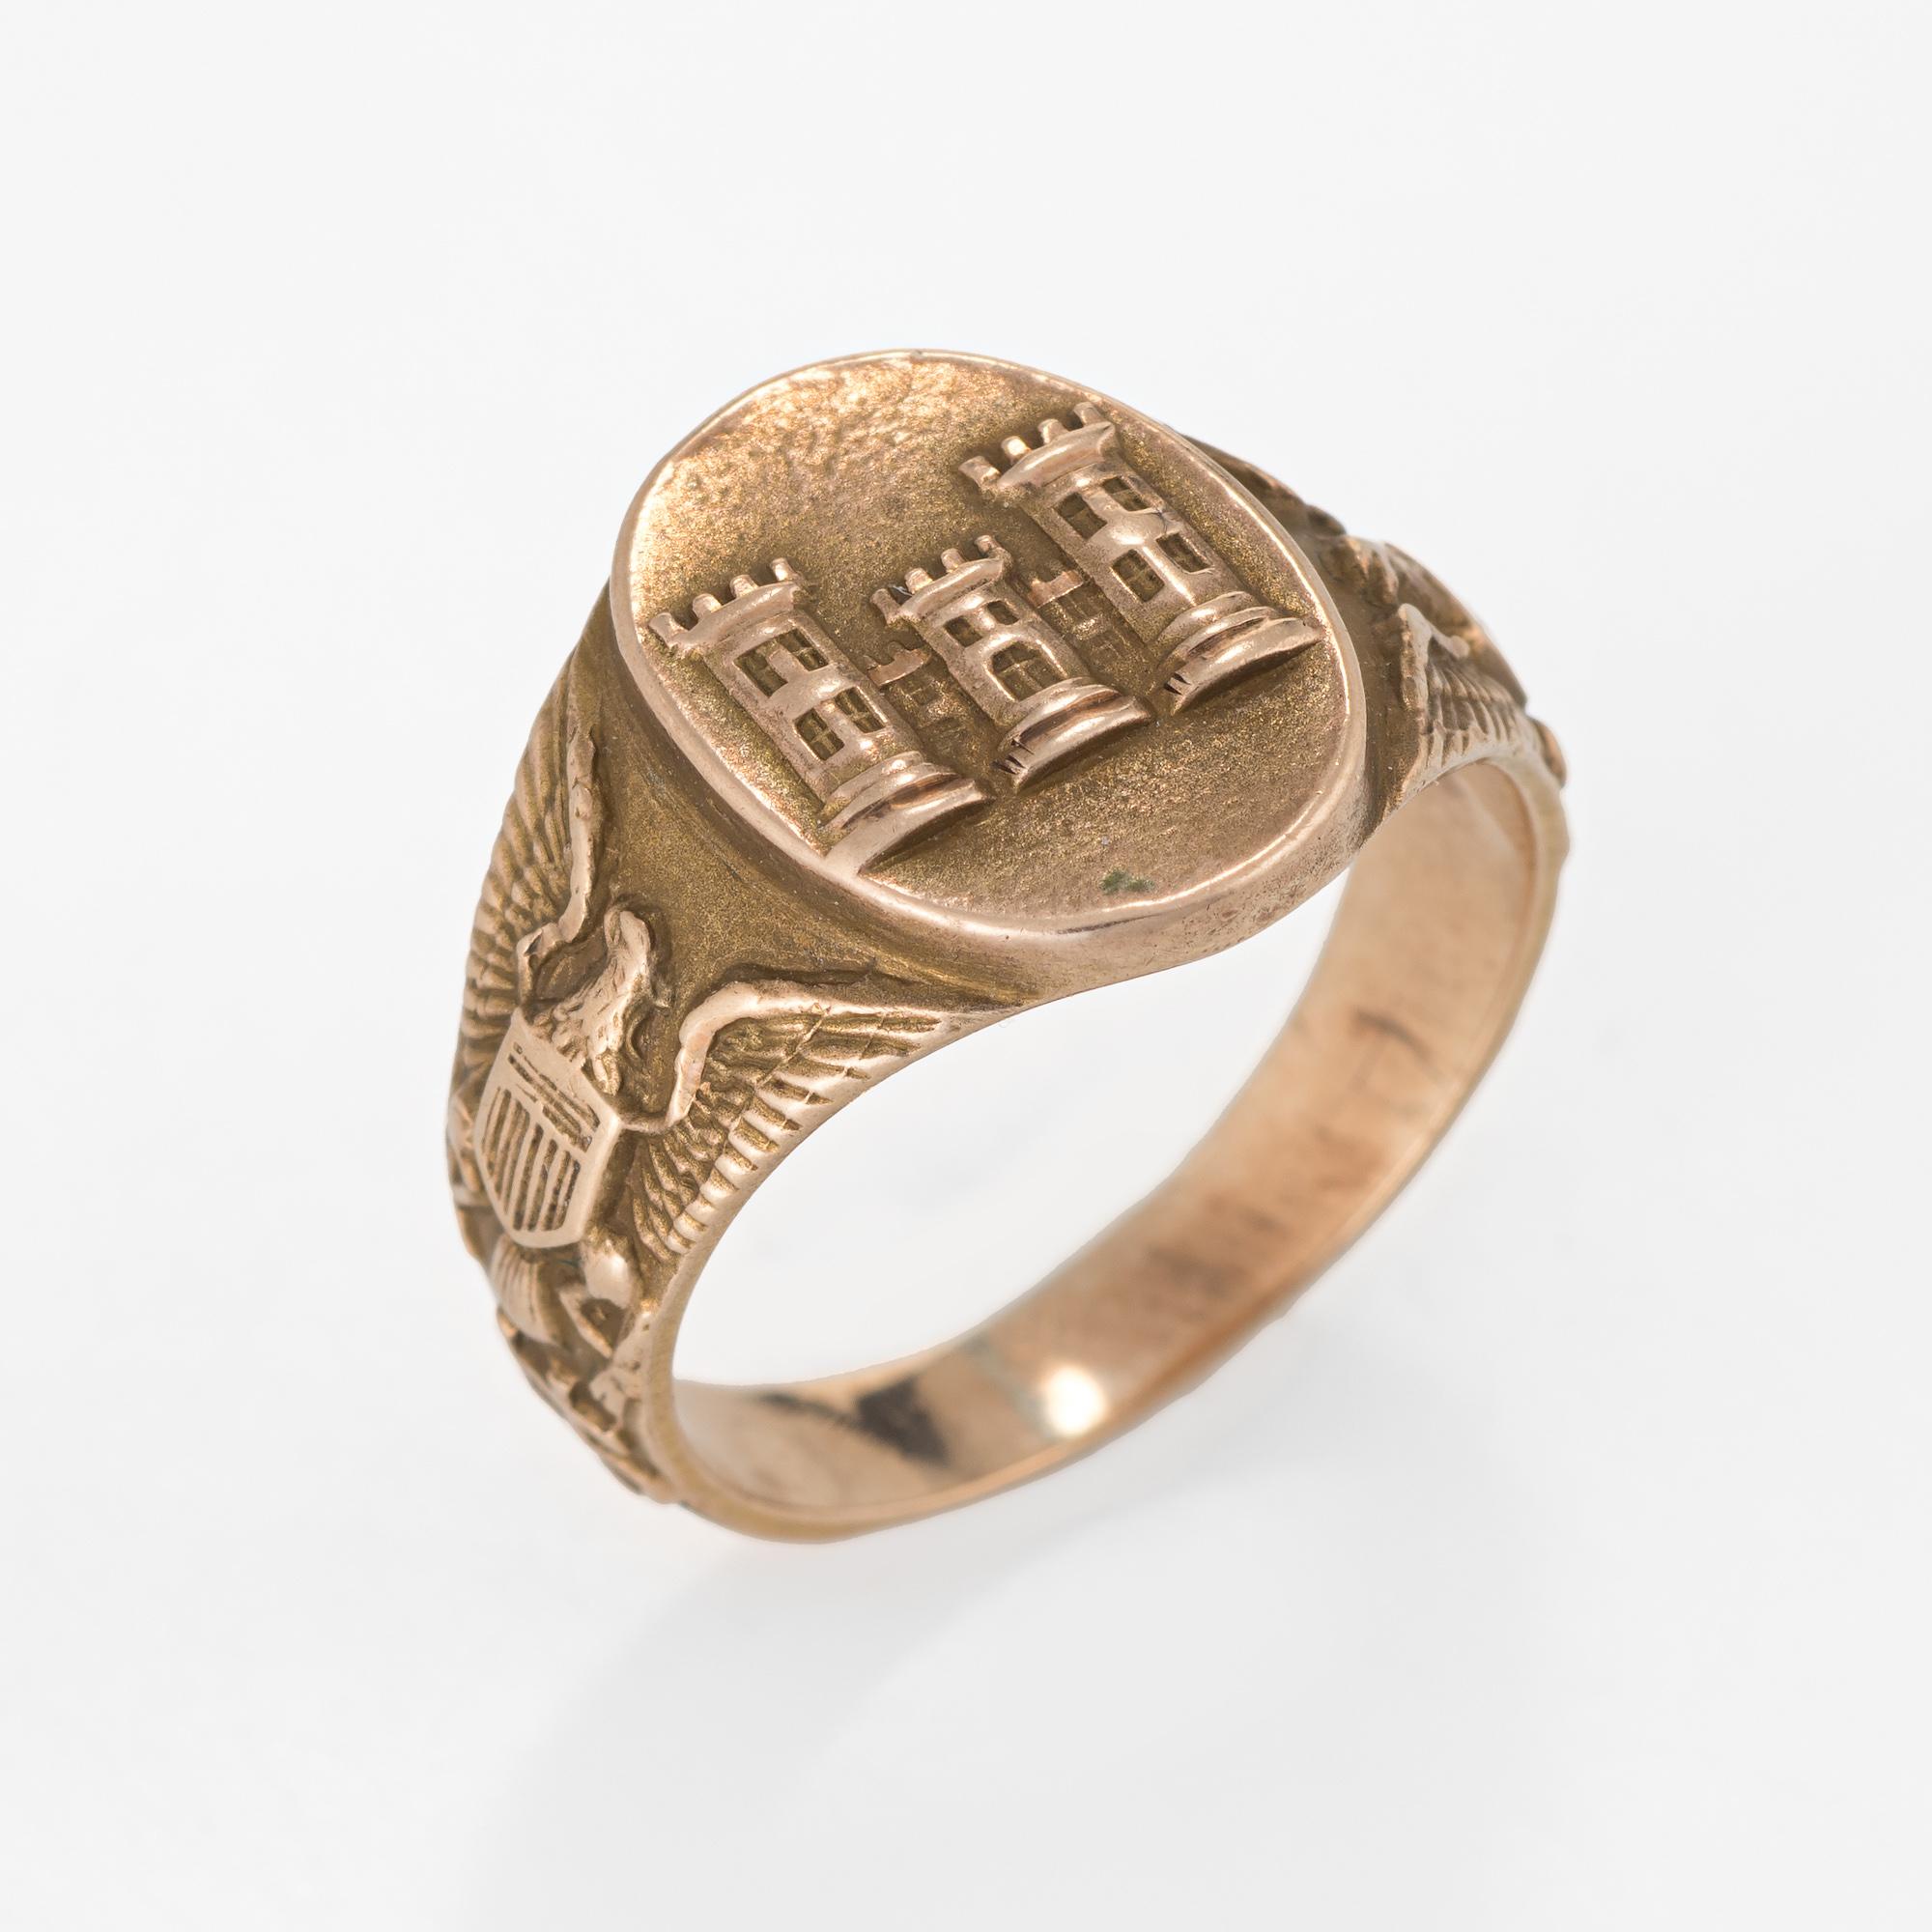 Finely detailed antique Edwardian US Army Corps of Engineers signet ring (circa 1918) crafted in 10 karat yellow gold. 

The ring features the insignia of the US Army Corps of Engineers, represented with the three buildings to the center of the